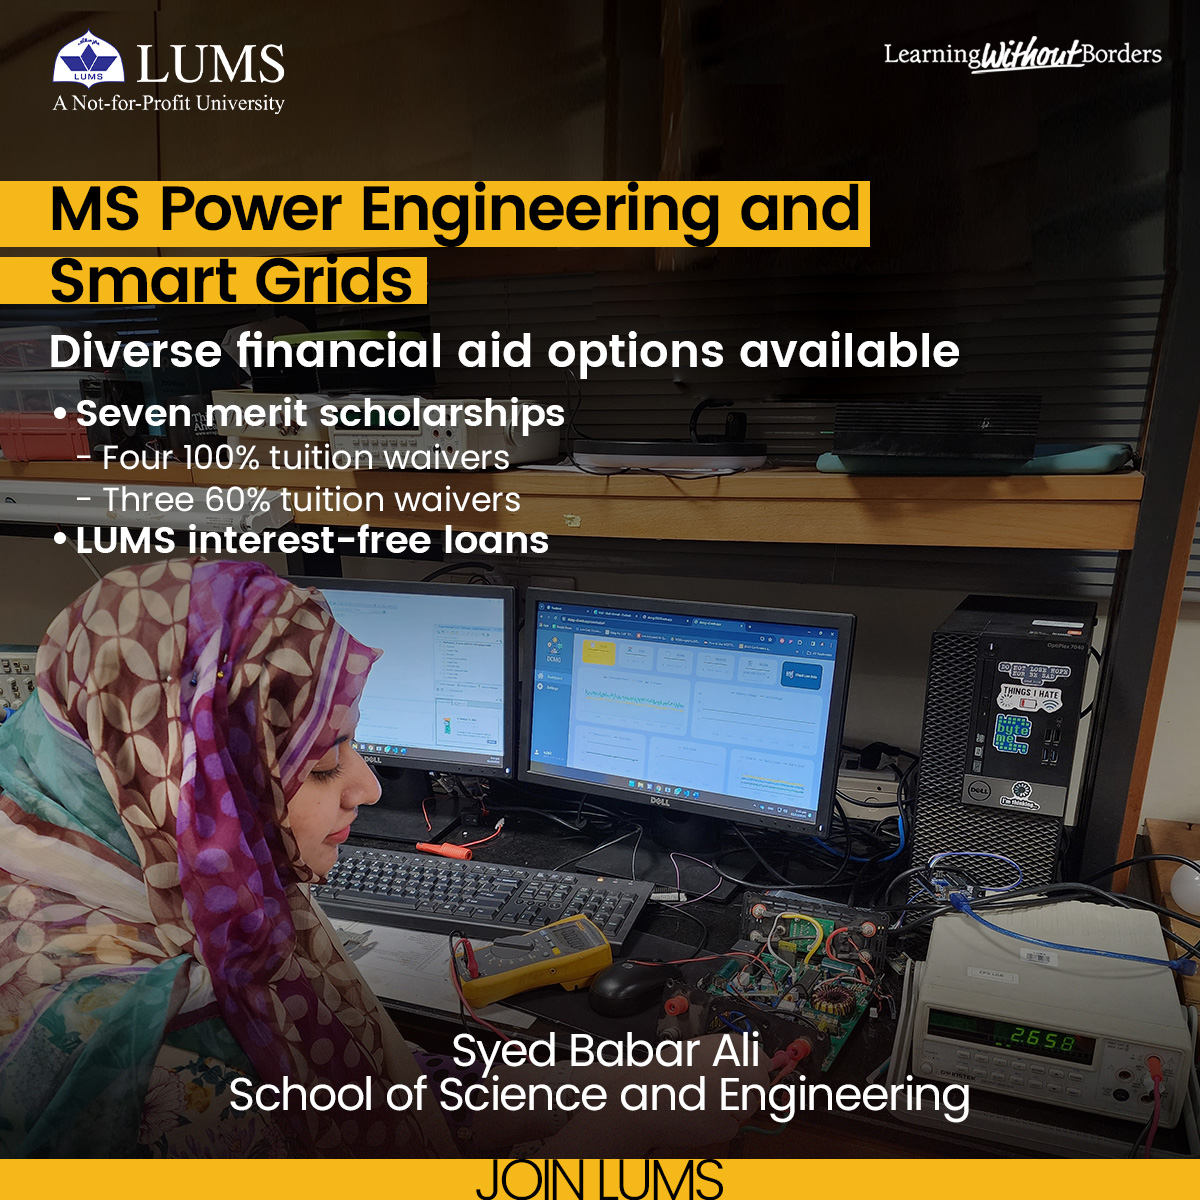 The MS Power Engineering and Smart Grids programme at @sbasselums offers financial assistance for talented students to join without financial concerns. Apply now to shape a sustainable energy landscape! bit.ly/41gZhNI #LearningWithoutBorders